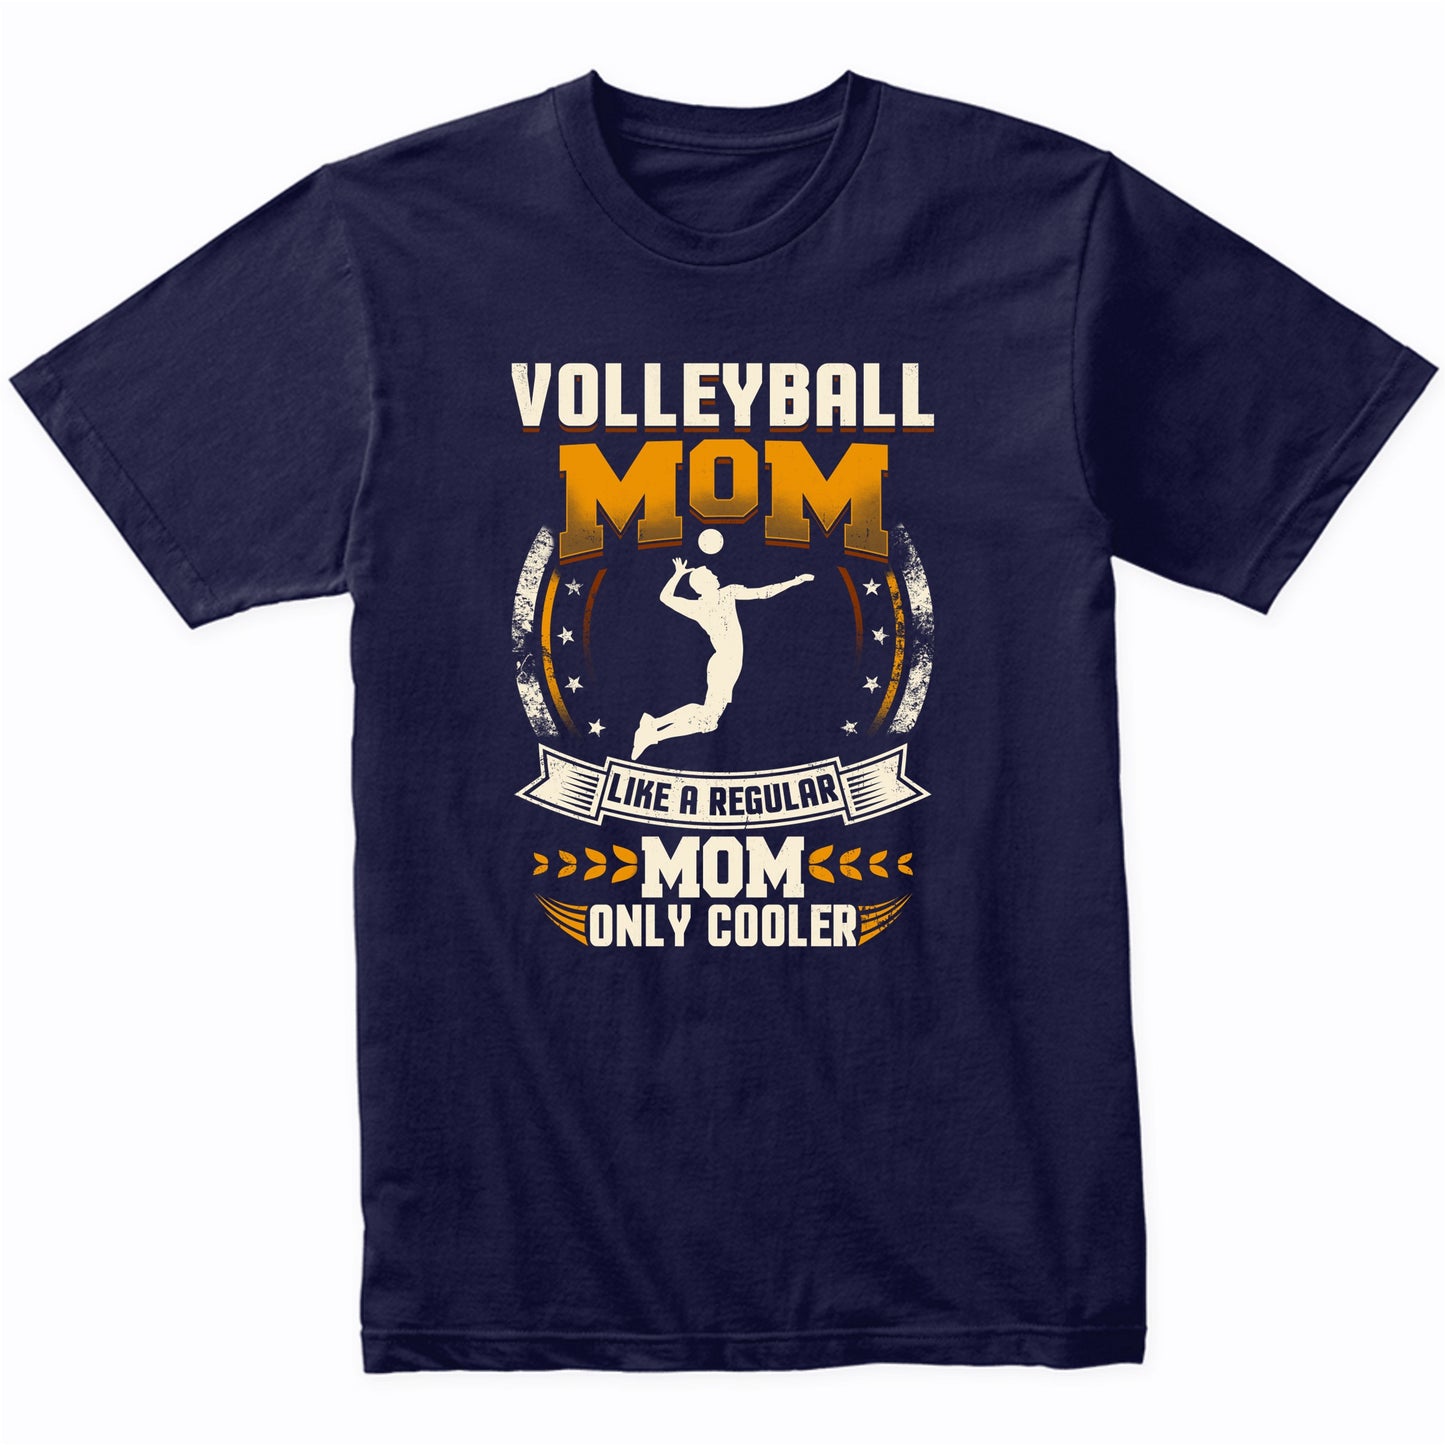 Volleyball Mom Like A Regular Mom Only Cooler Funny T-Shirt